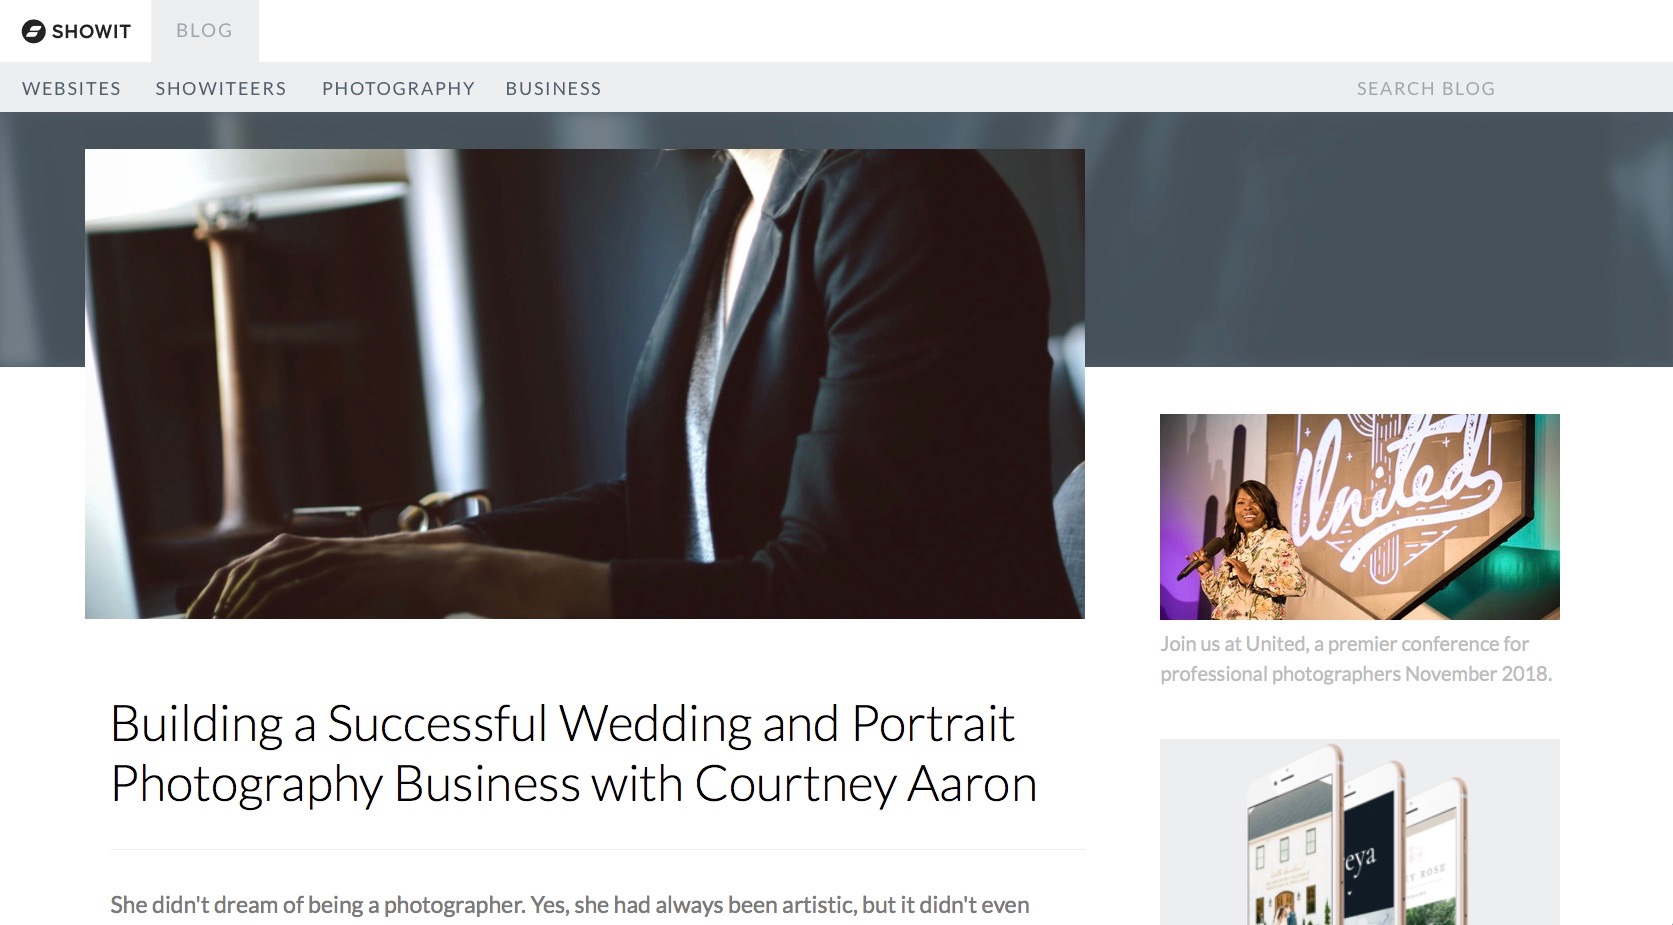 Building a Successful Wedding and Portrait Photography Business